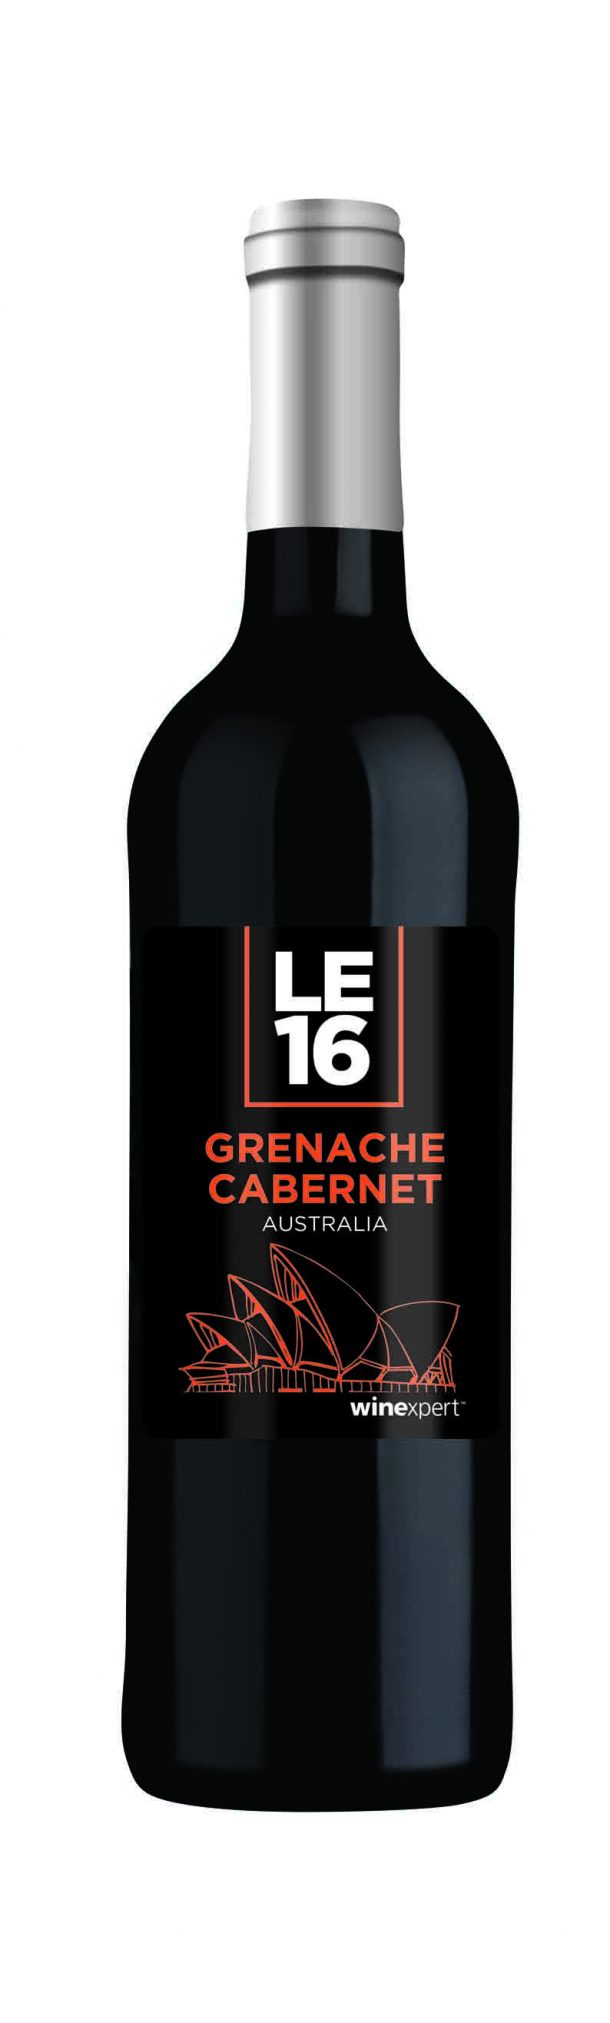 Grenache LE16 Winexpert Limited Edition PREORDER Brew and